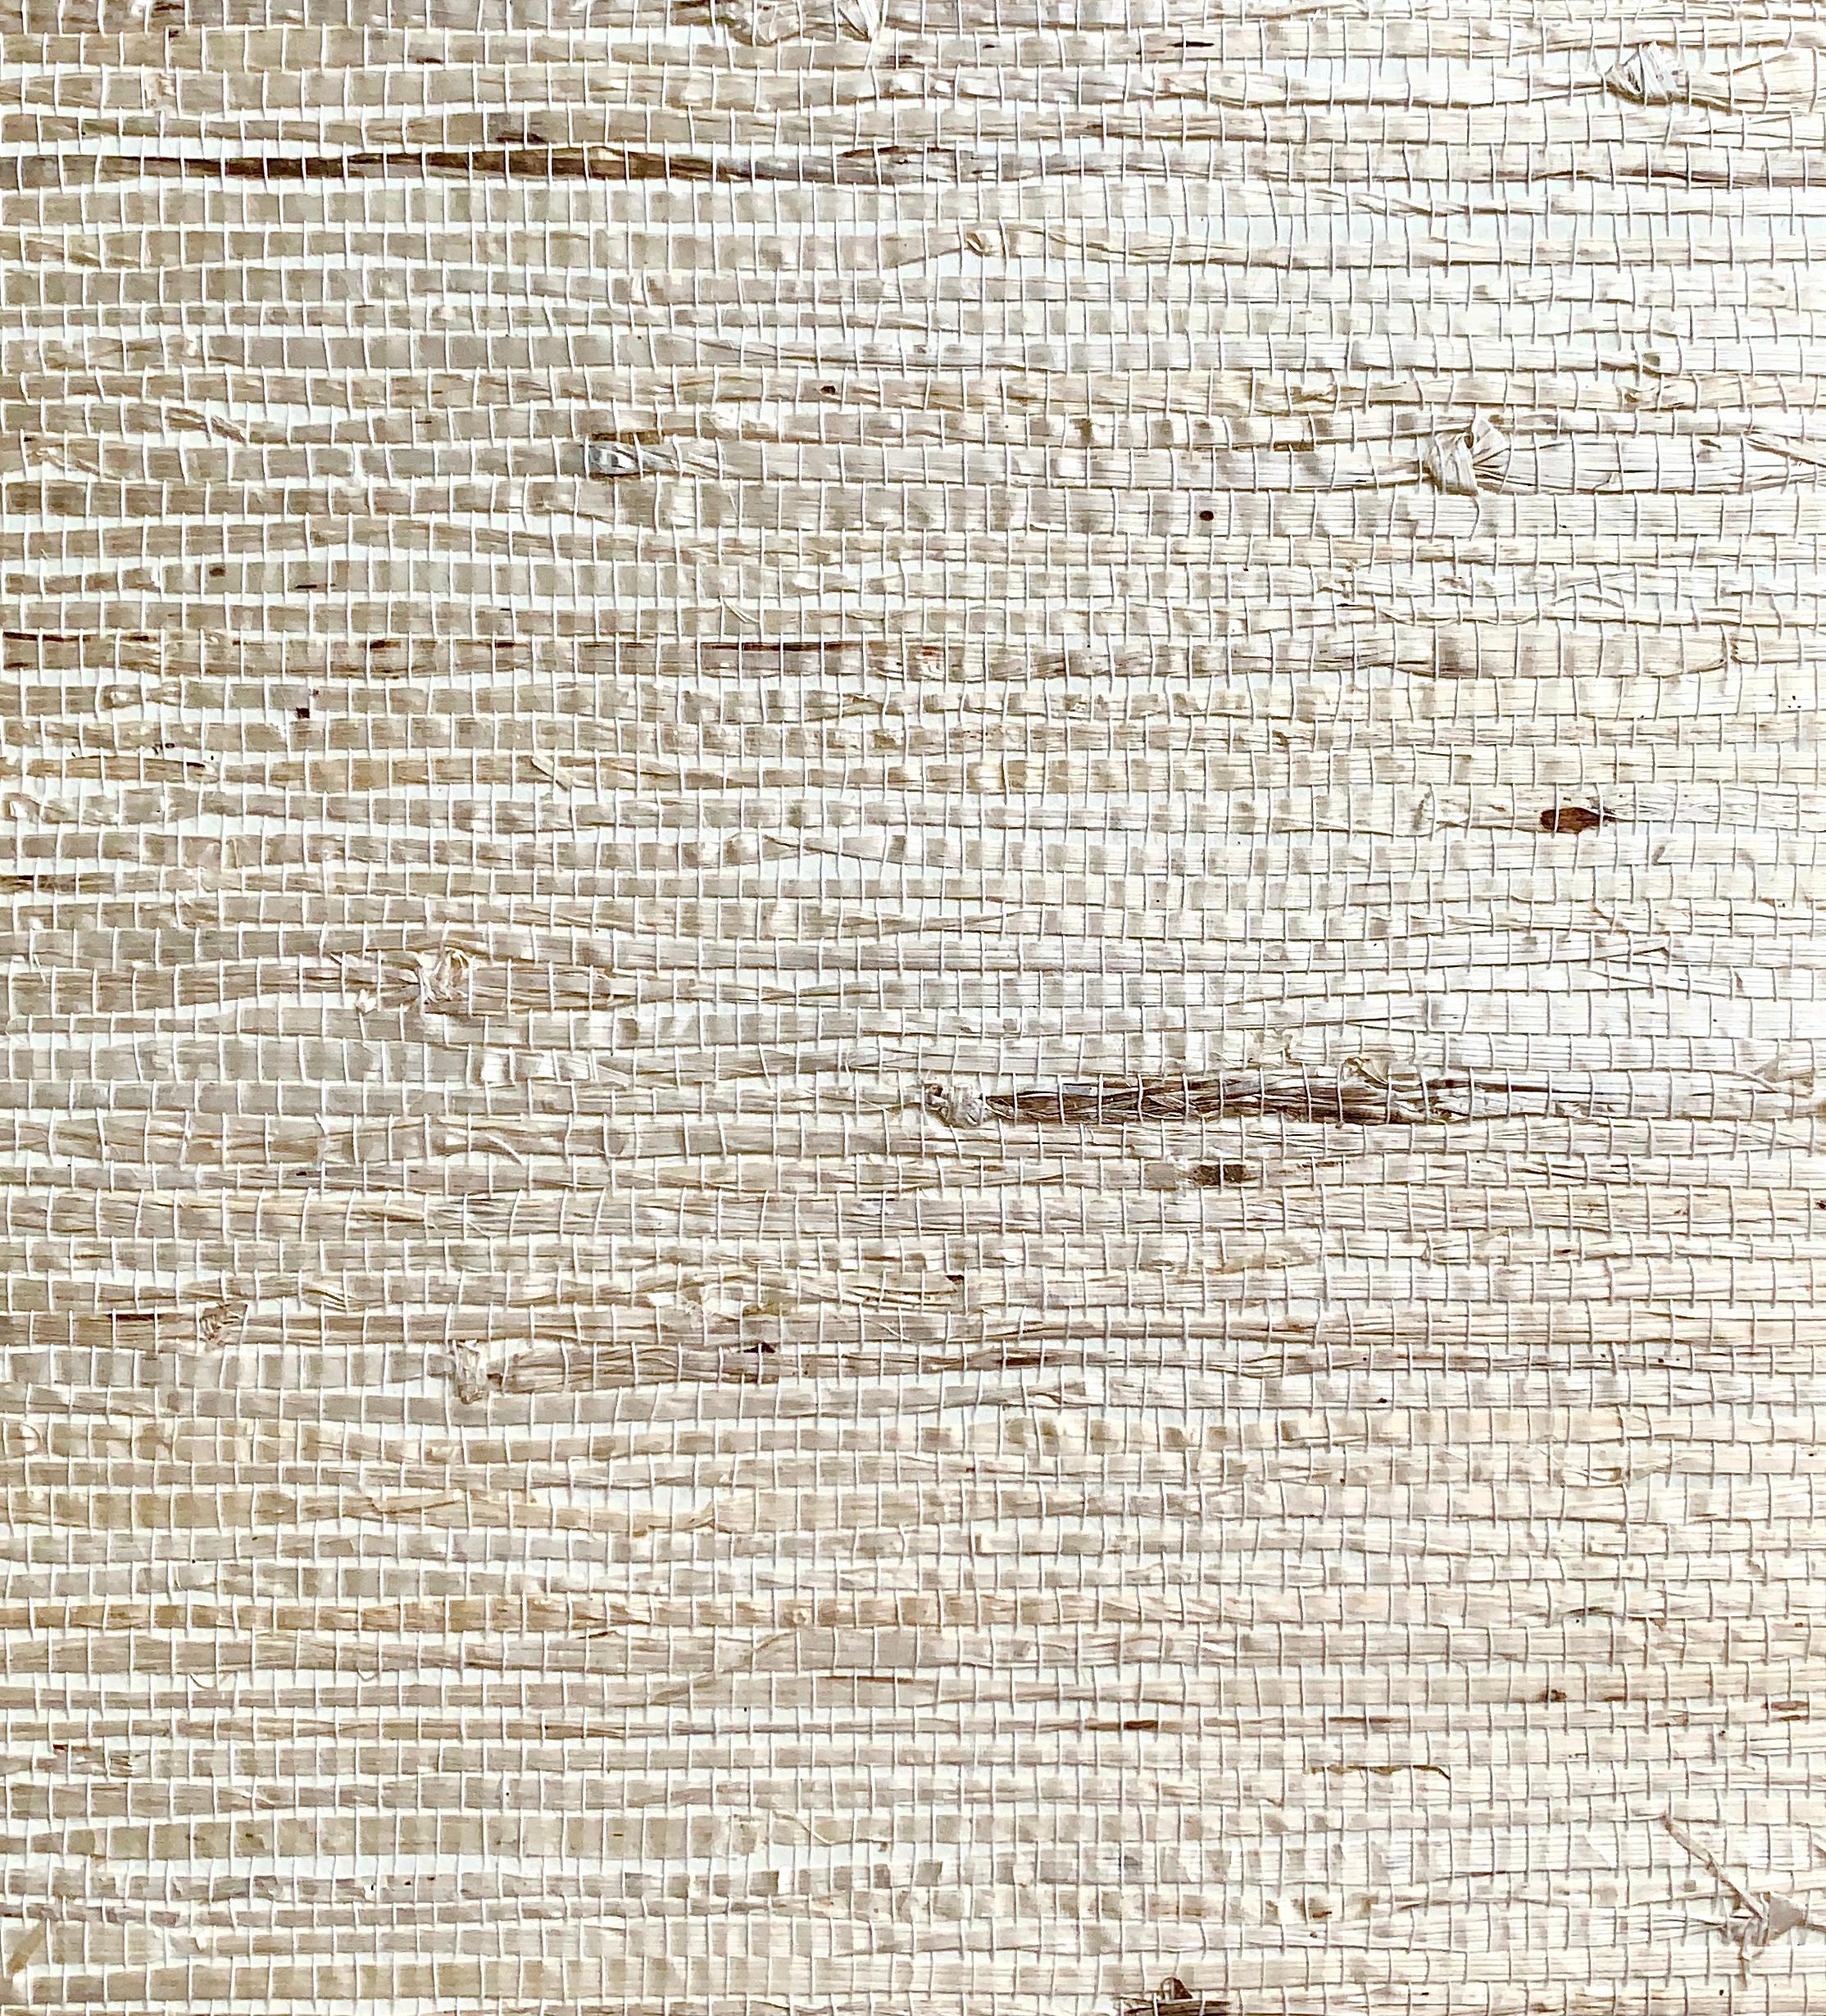 Phillip Jeffries extra-fine arrowroot handmade natural wallpaper, feather colorway. Handmade Arrowroot grass cloth wall covering. Sold by 8 yard bolt. MSRP per yard: 78 USD (624 per bolt).